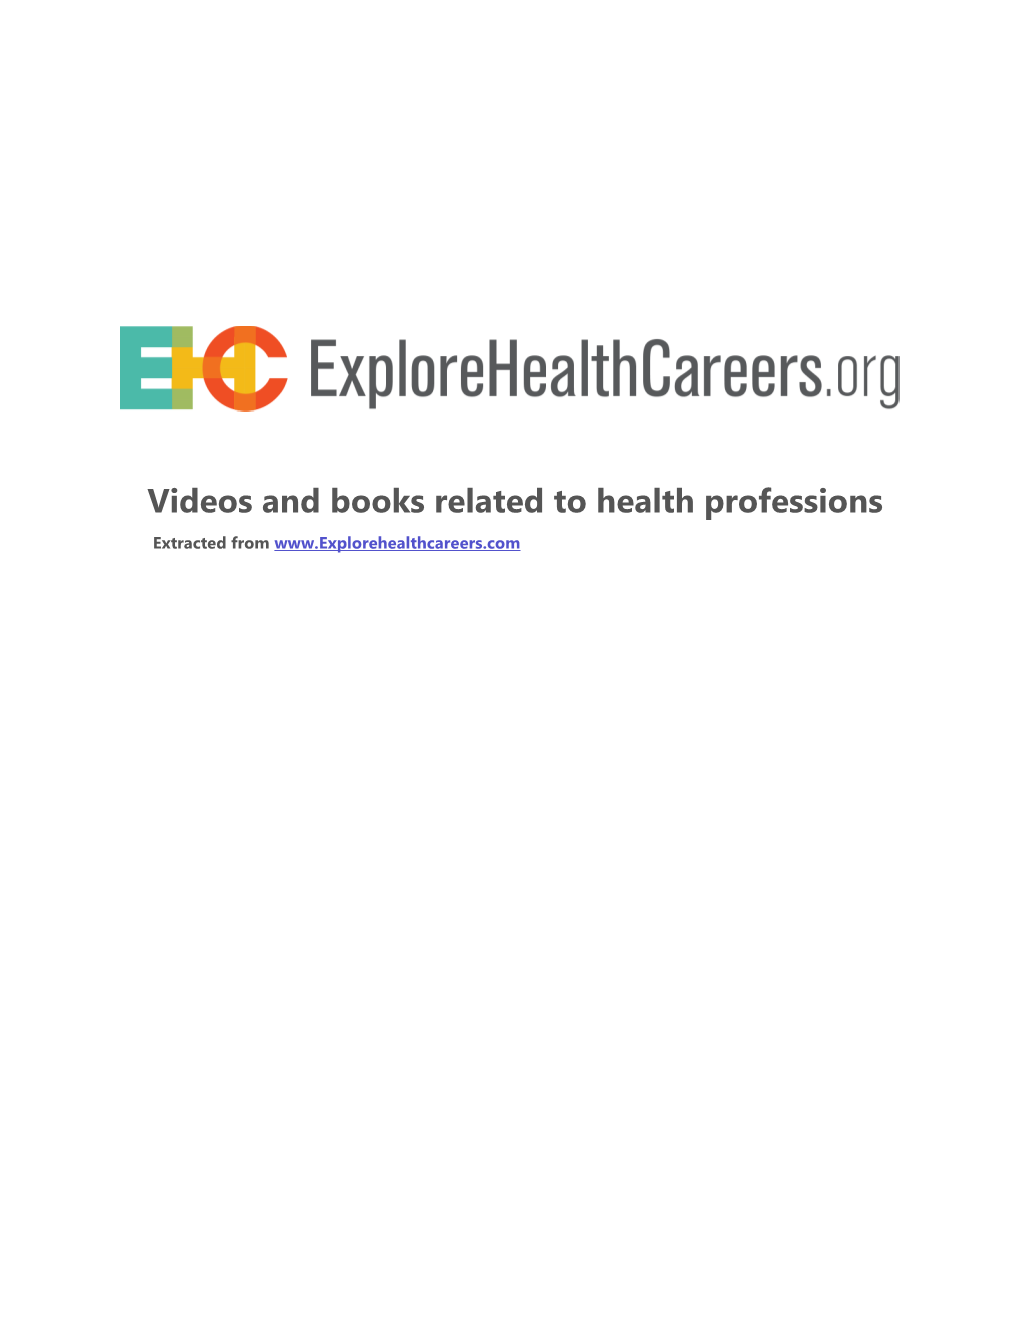 Videos and Books Related to Health Professions Extracted From